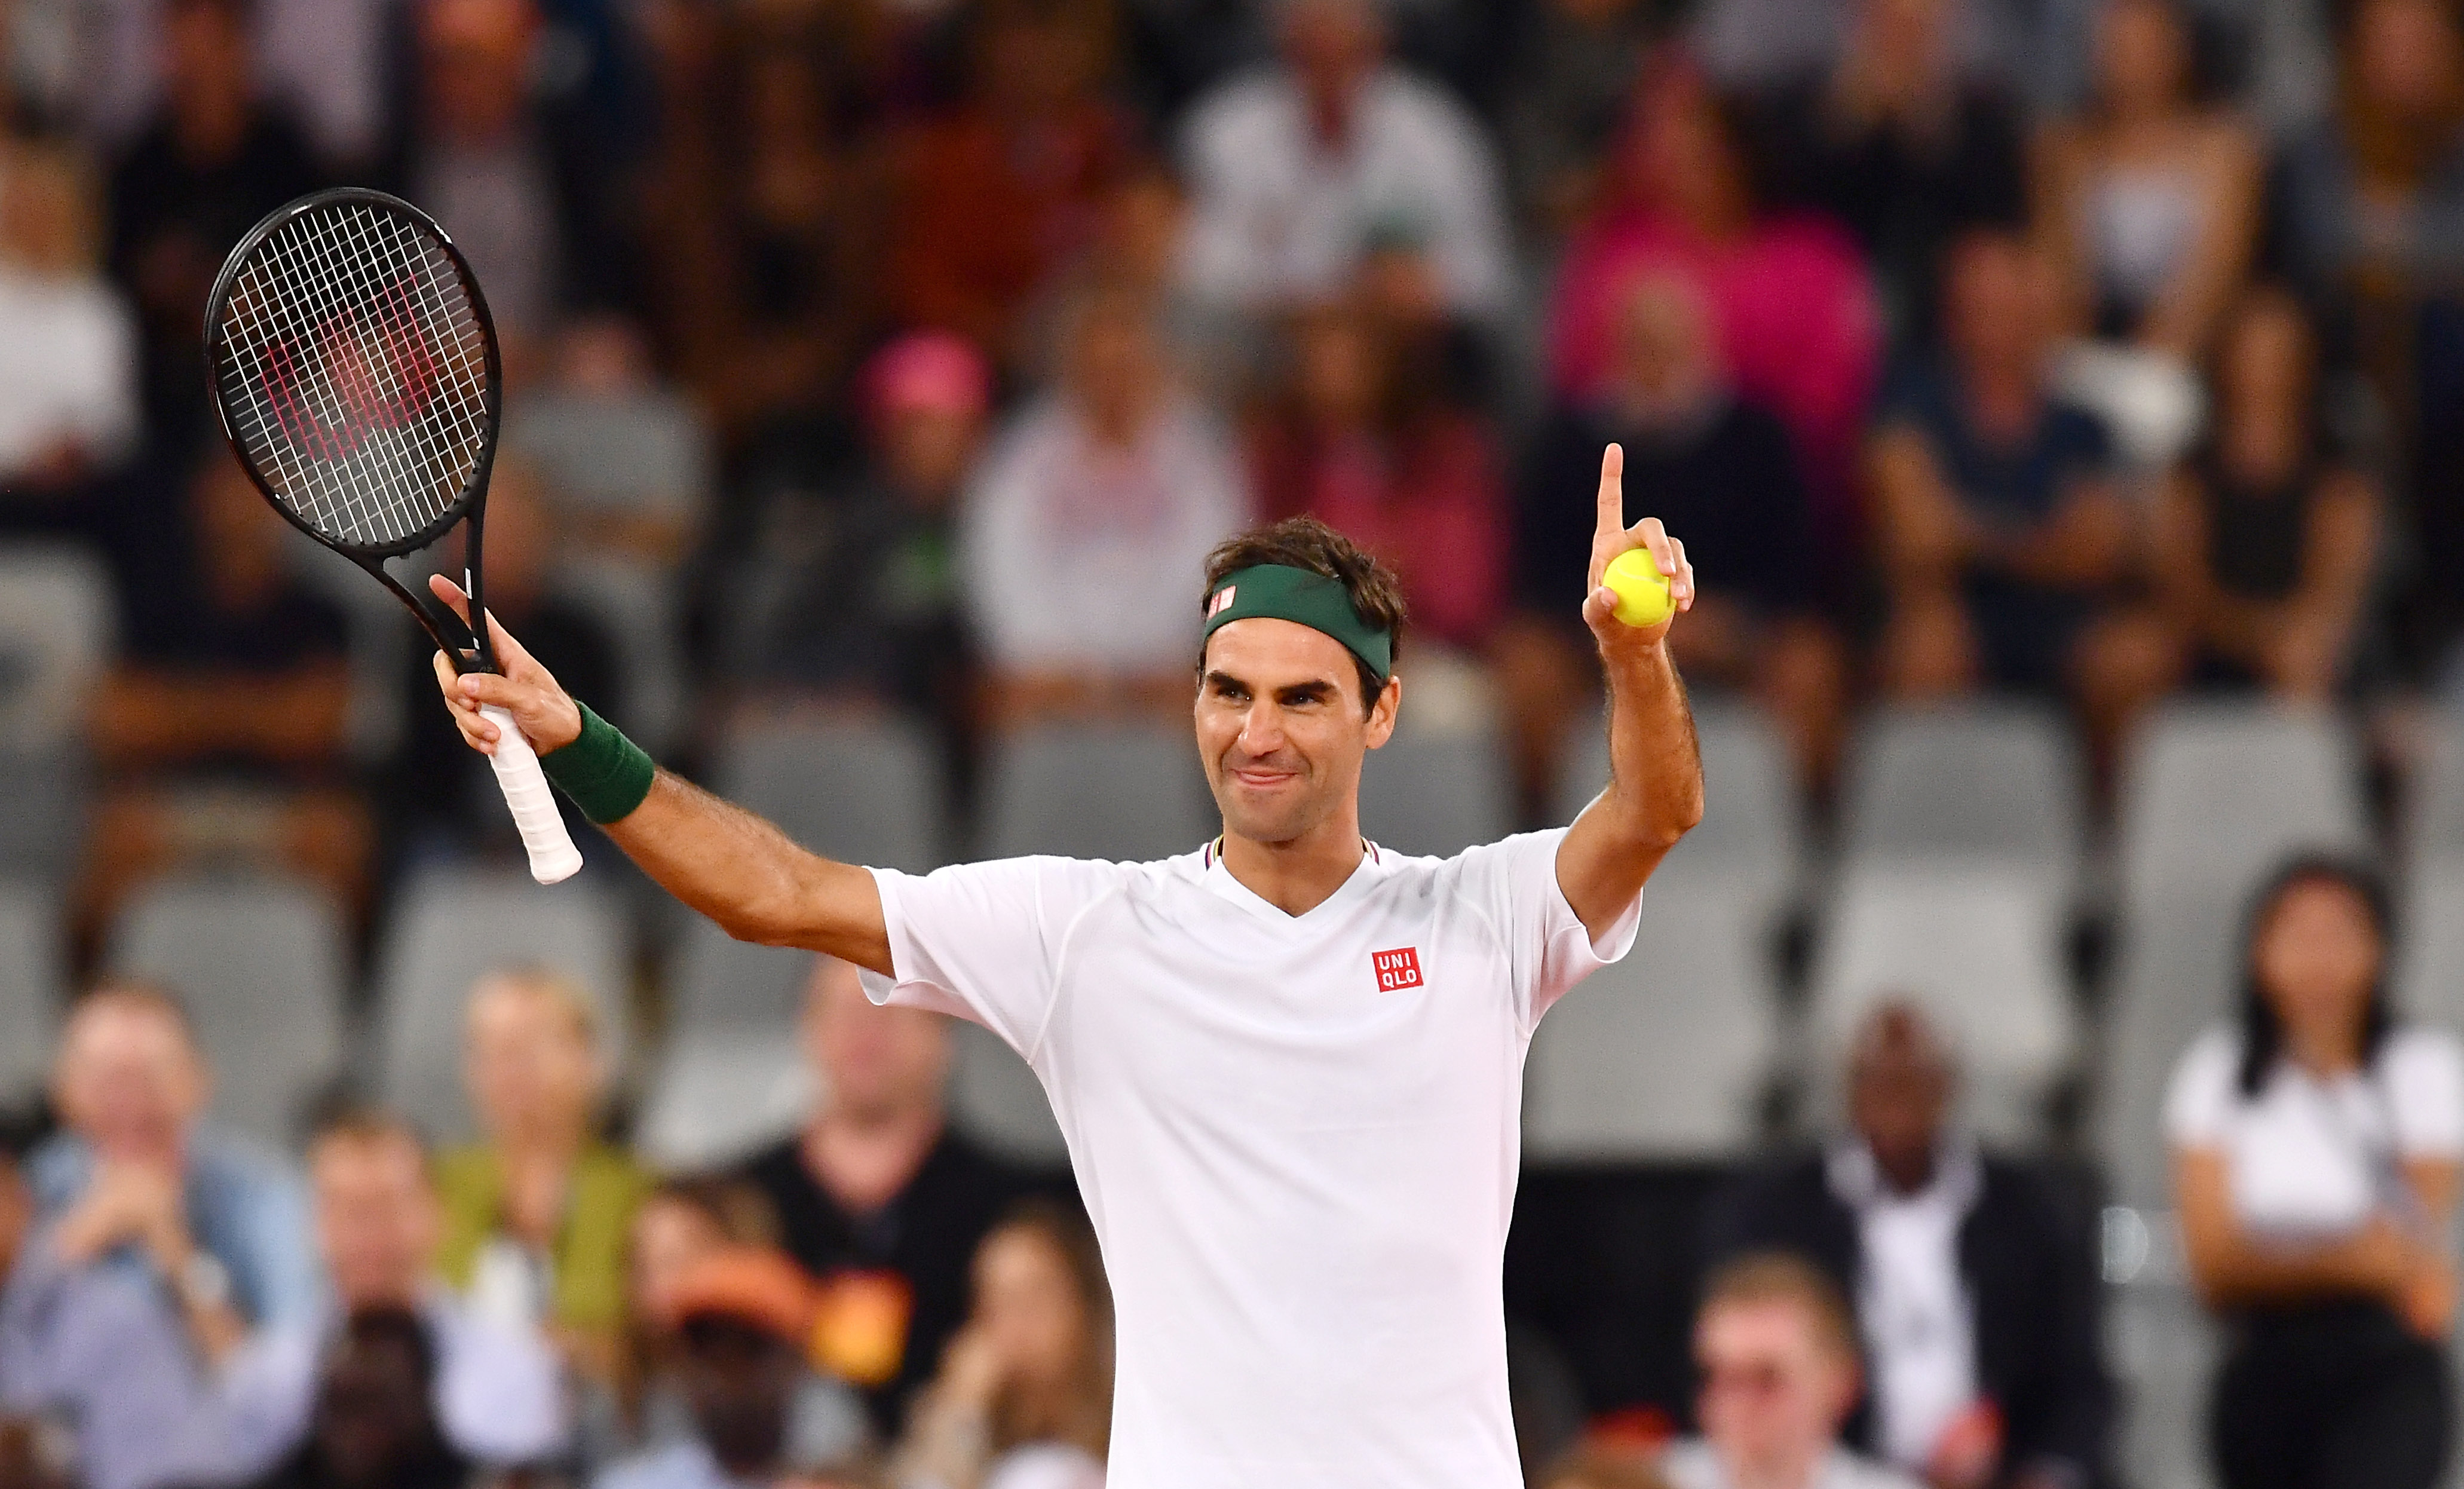 Roger Federer’s Net Worth Is a Massive $550 Million, But He Has a Simple Plan for Retirement